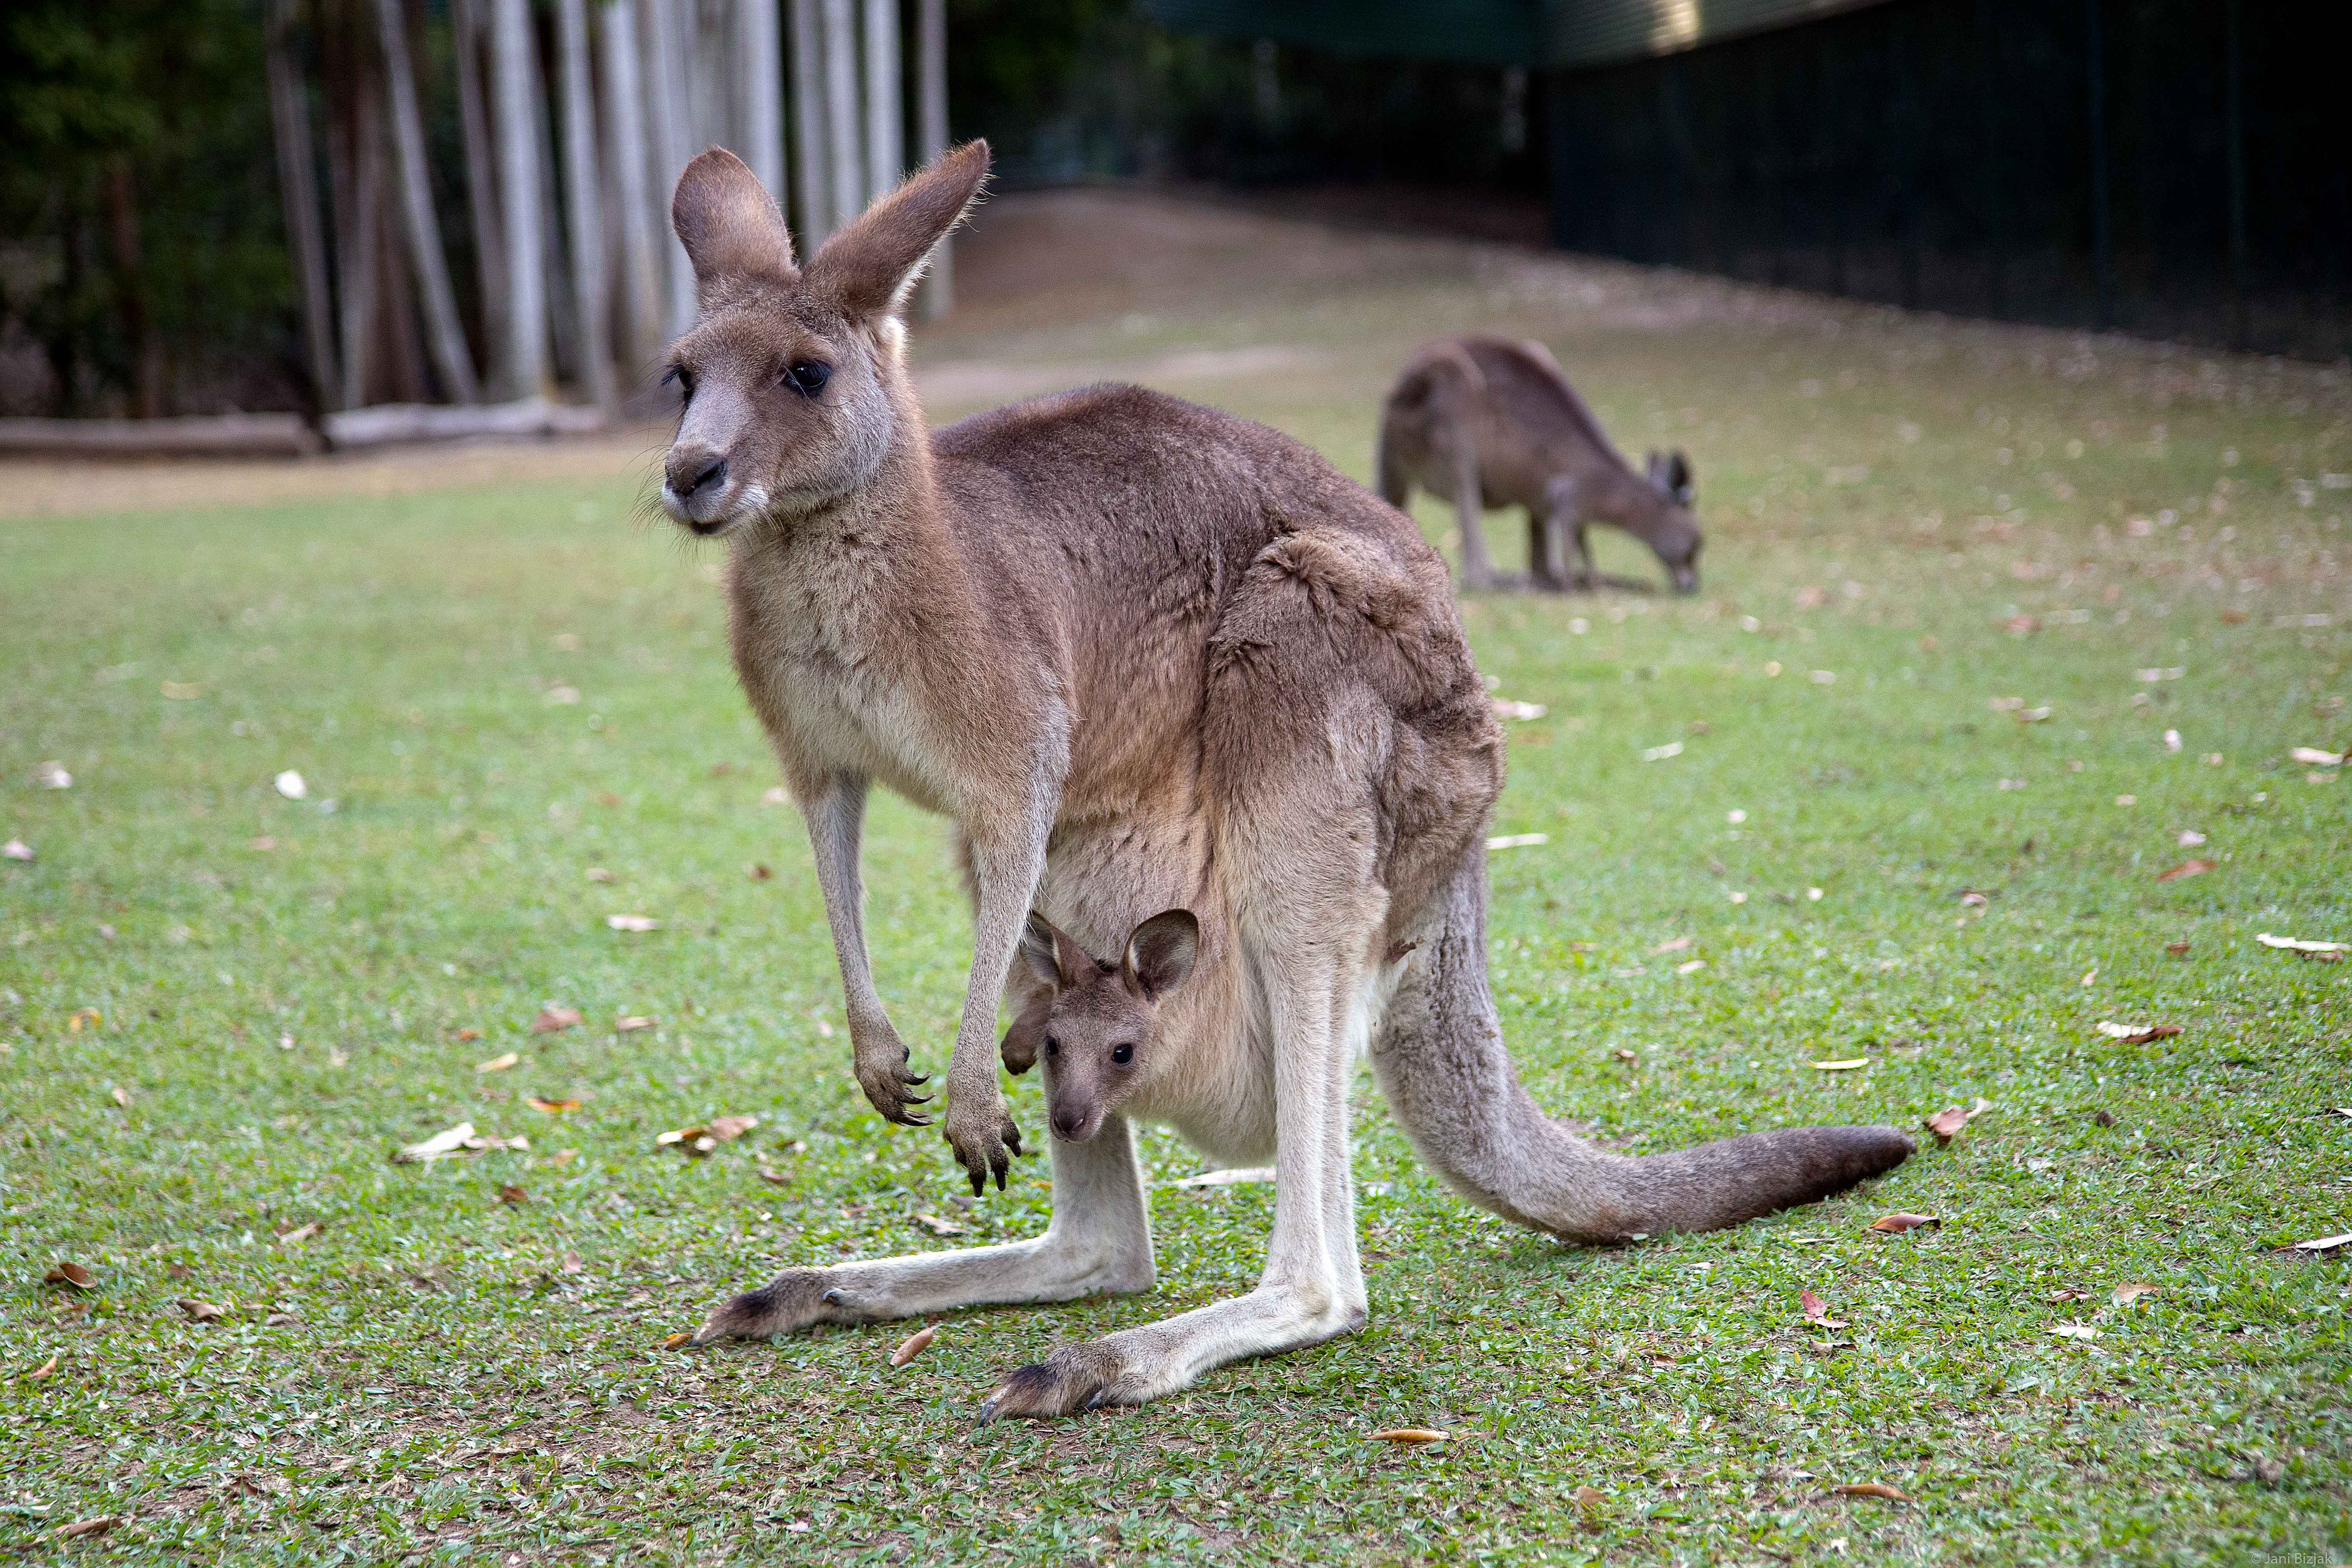 Kangaroo with baby in the pouch.